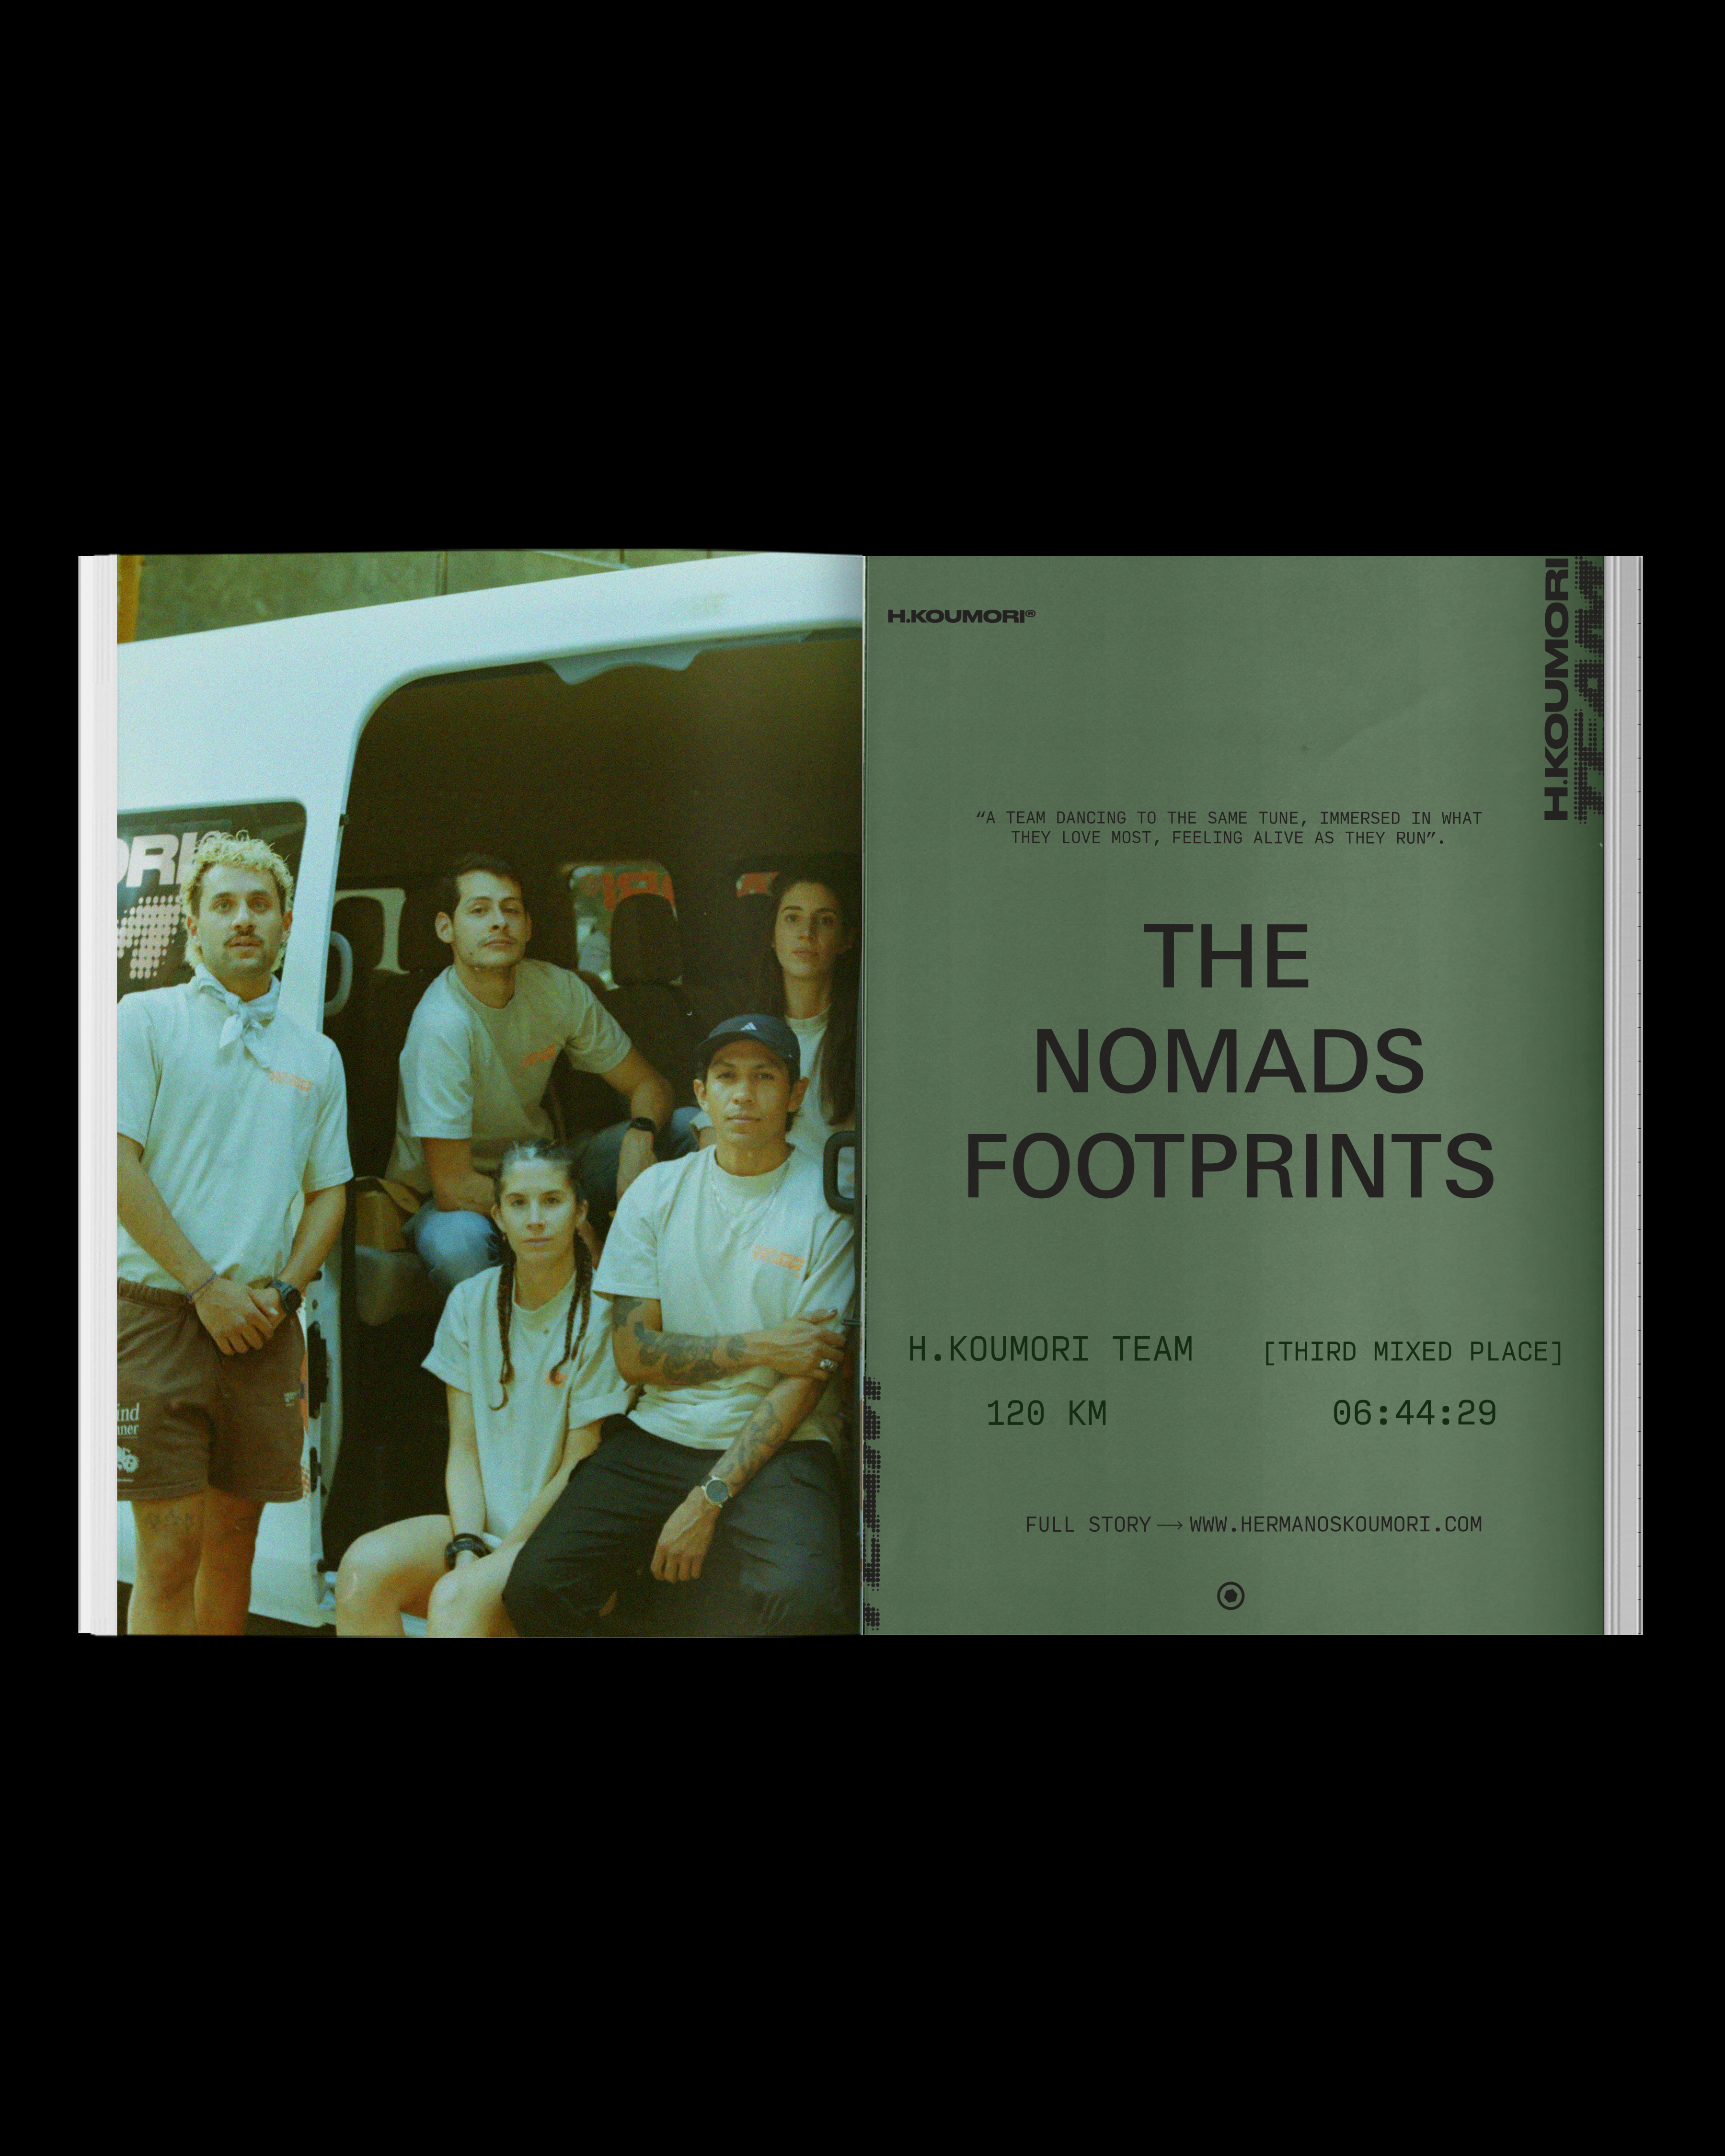 The Nomads Footprints